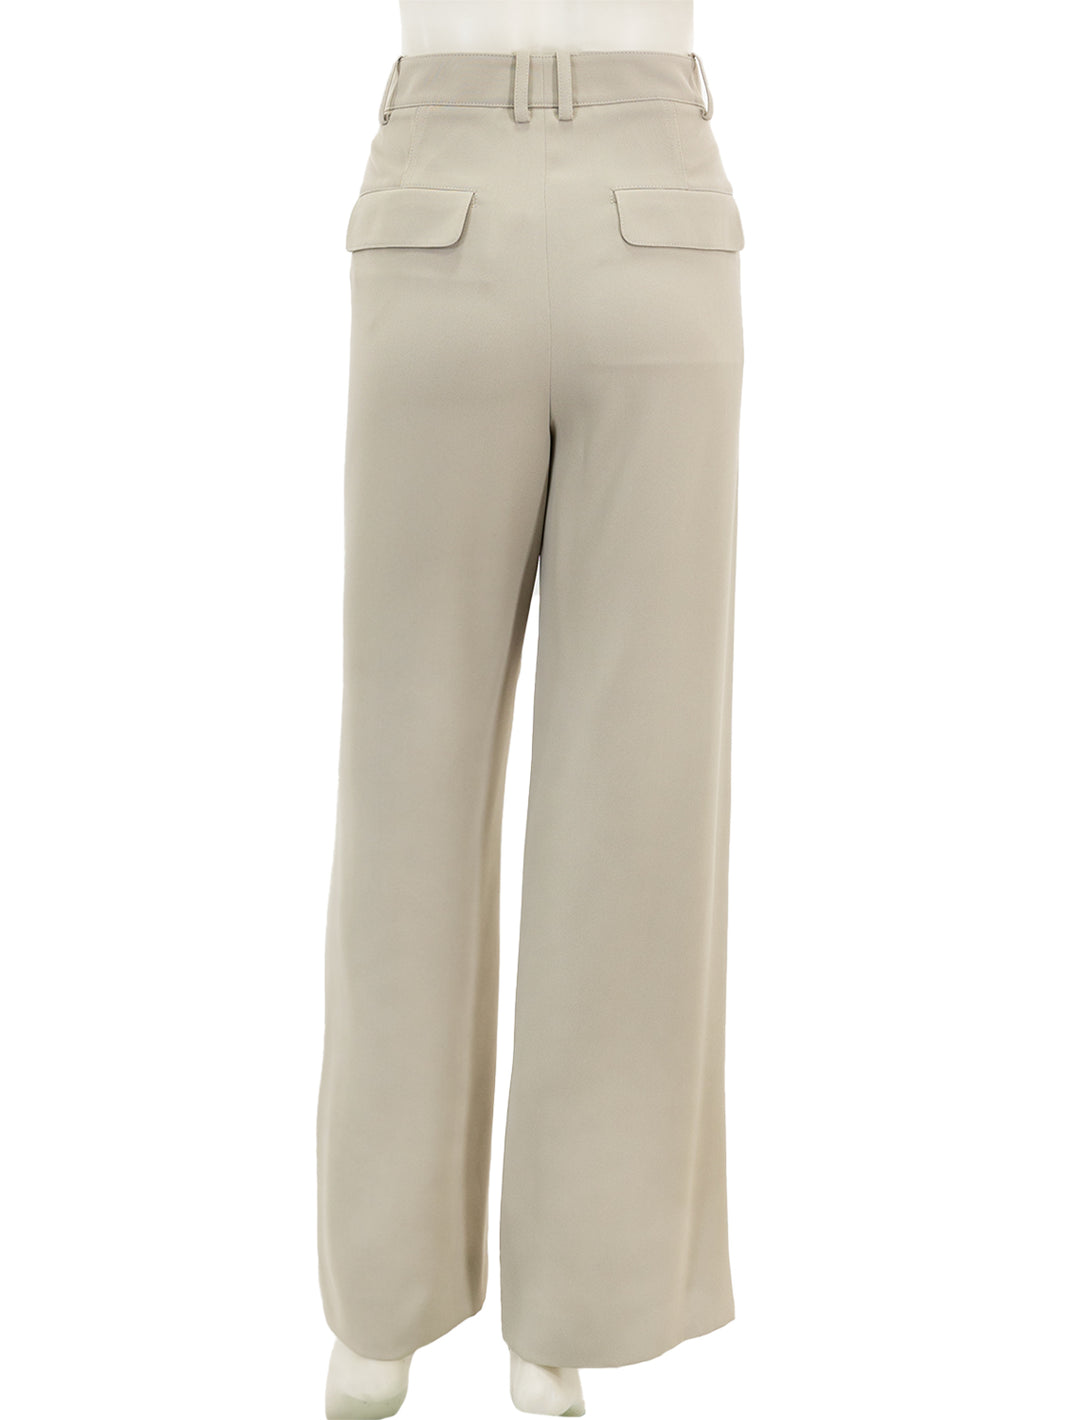 Back view of Vince's crepe wide leg utility pant in sepia.